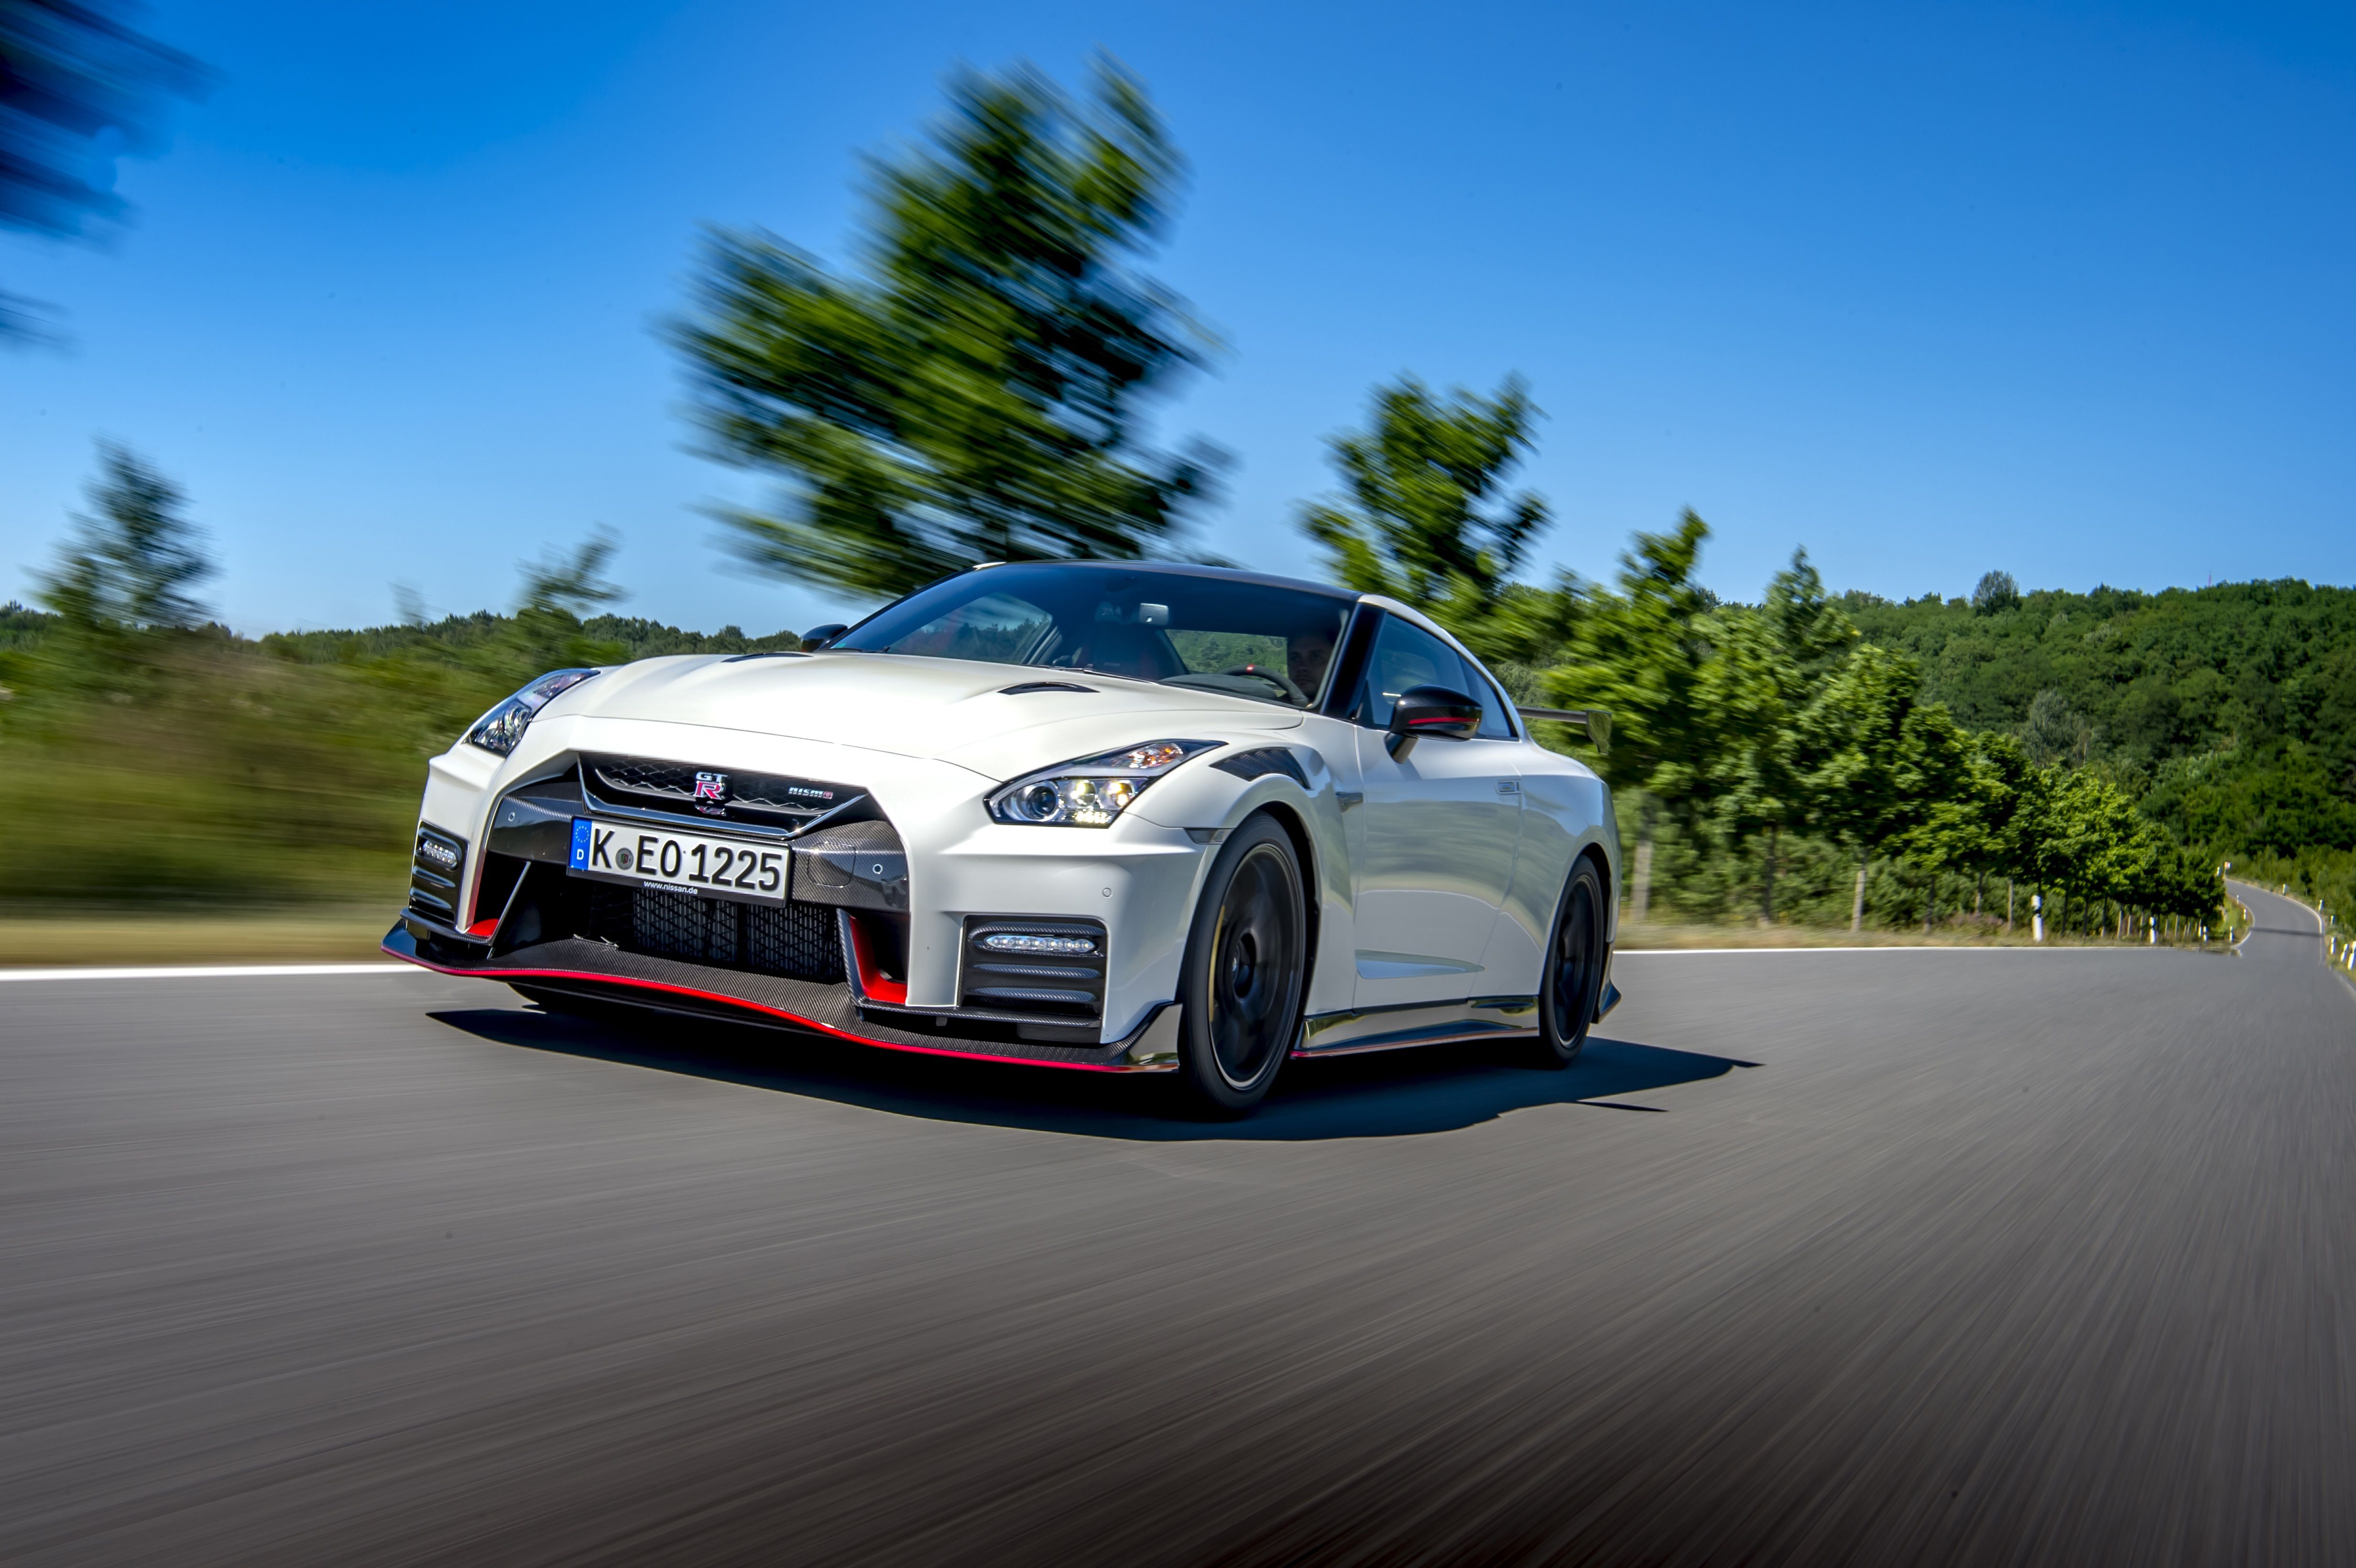 2020 Nissan GT-R Pricing Released